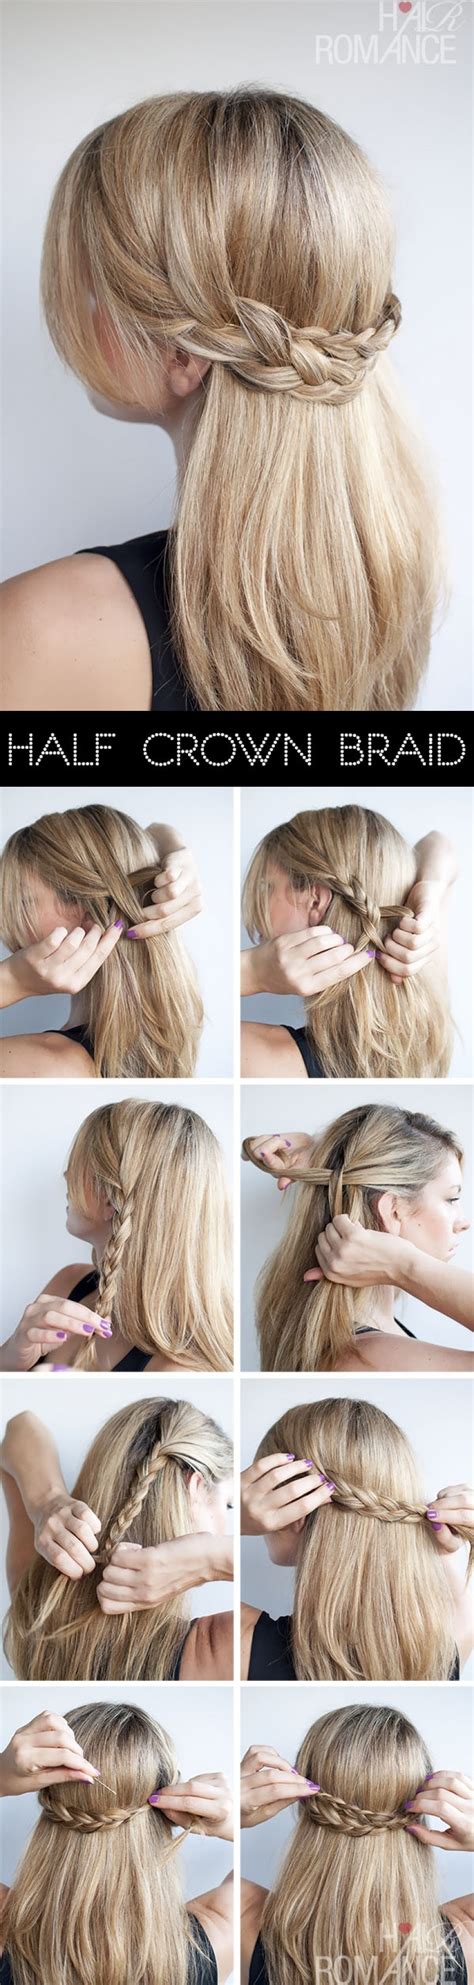 16 Super Easy Hairstyles To Make On Your Own